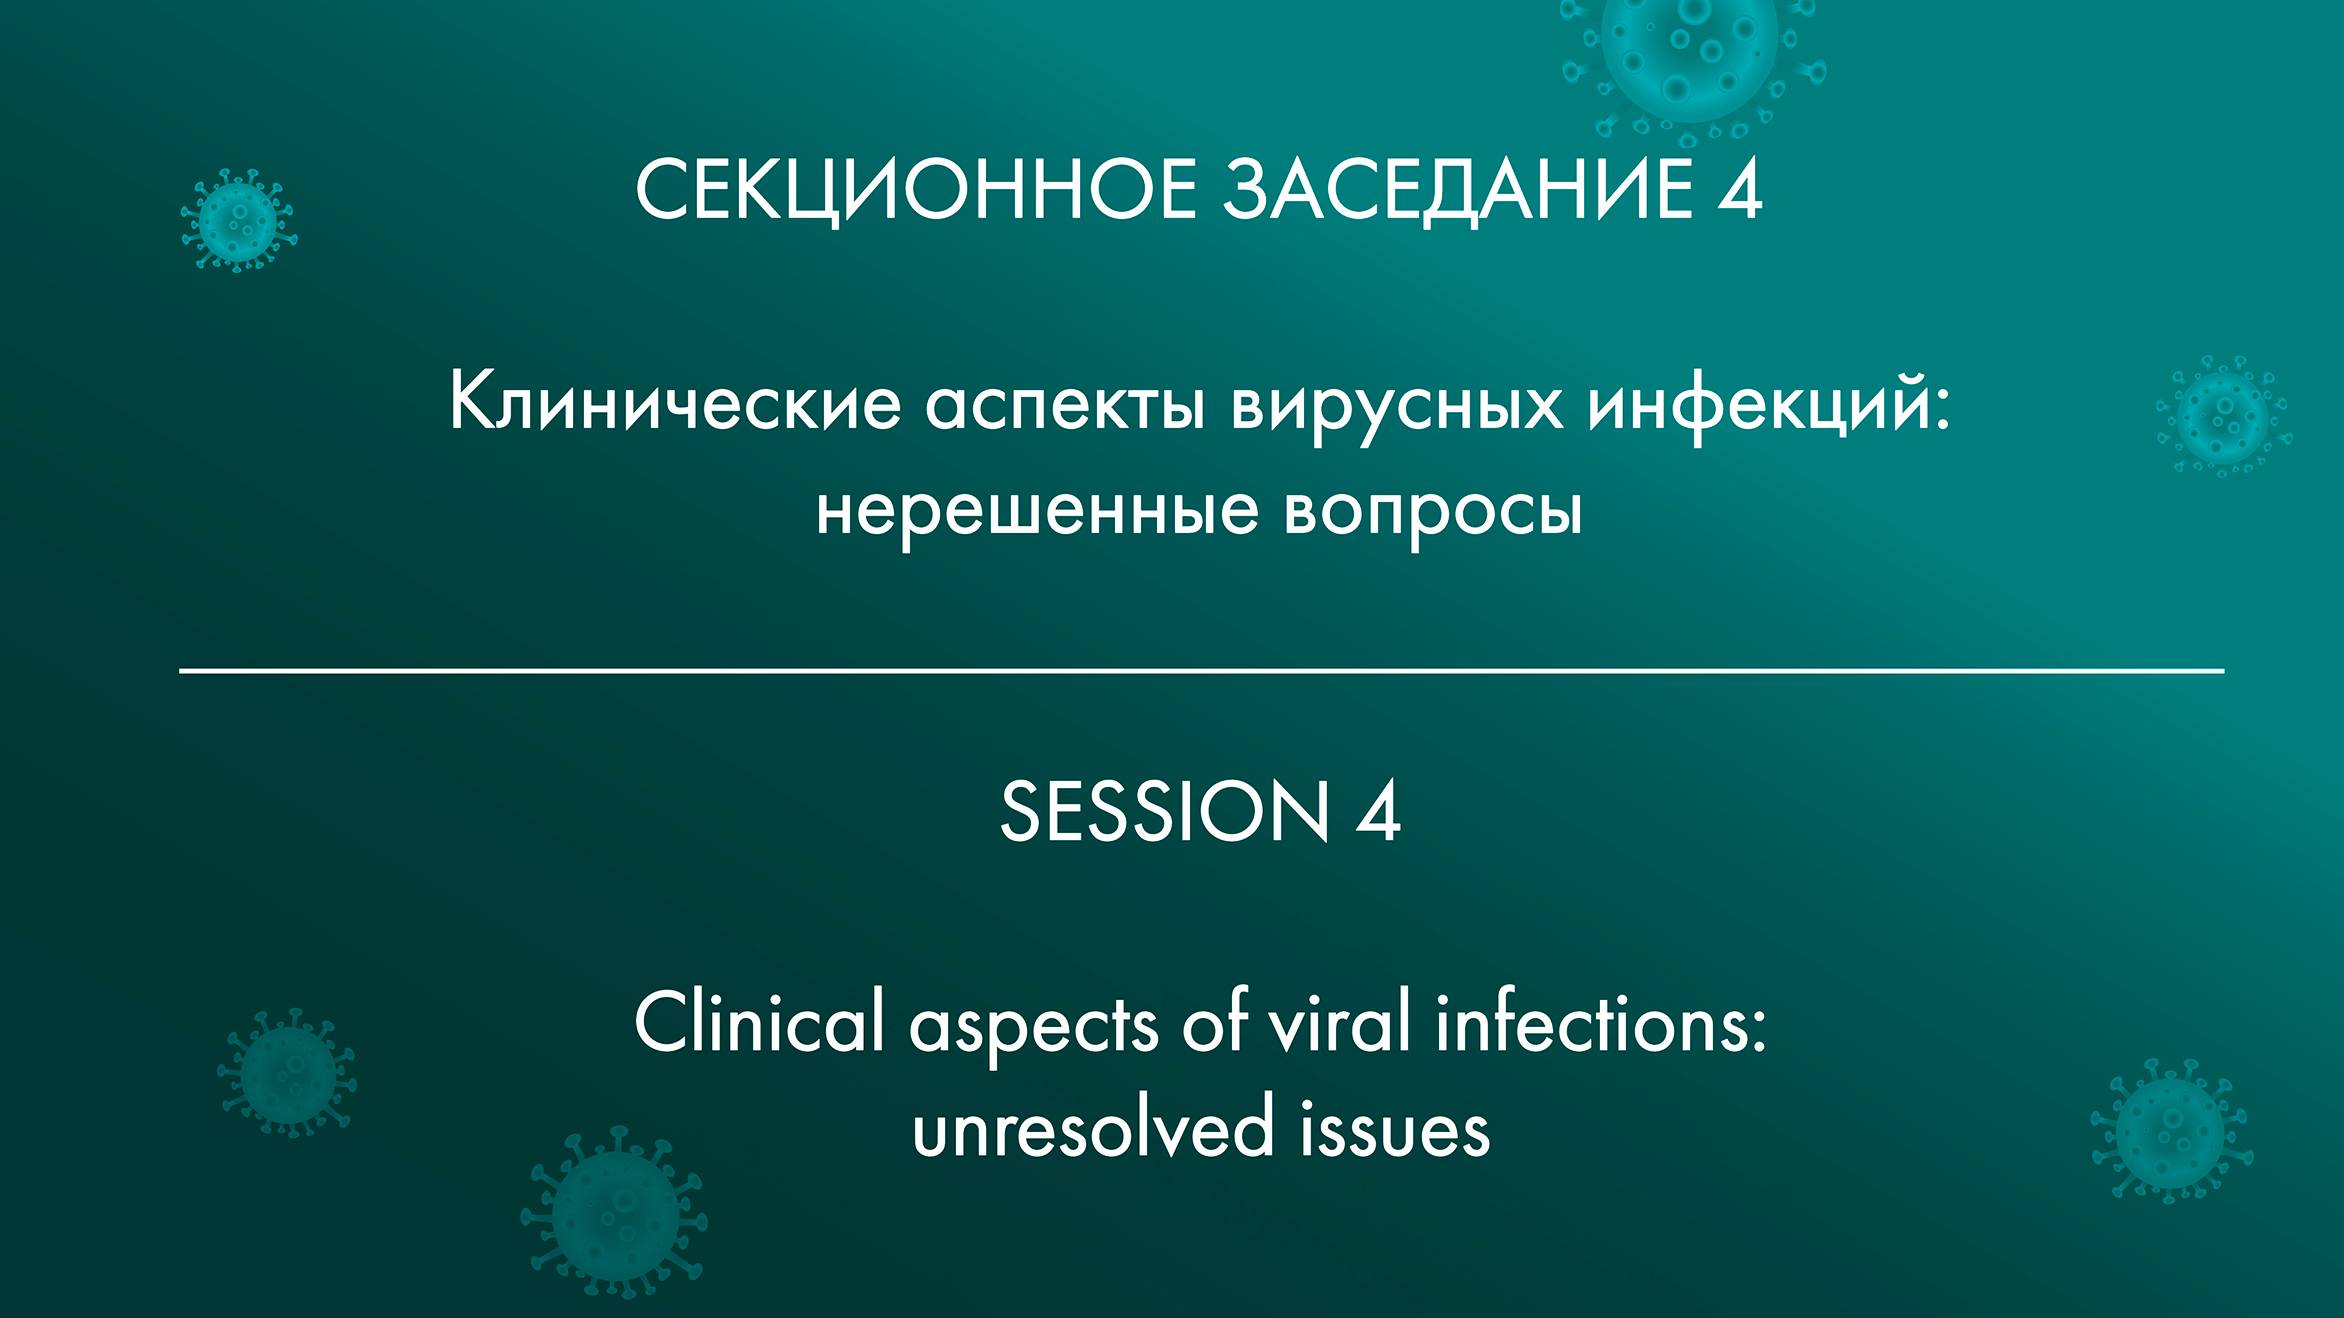 SESSION 4 Clinical aspects of viral infections: unresolved issues